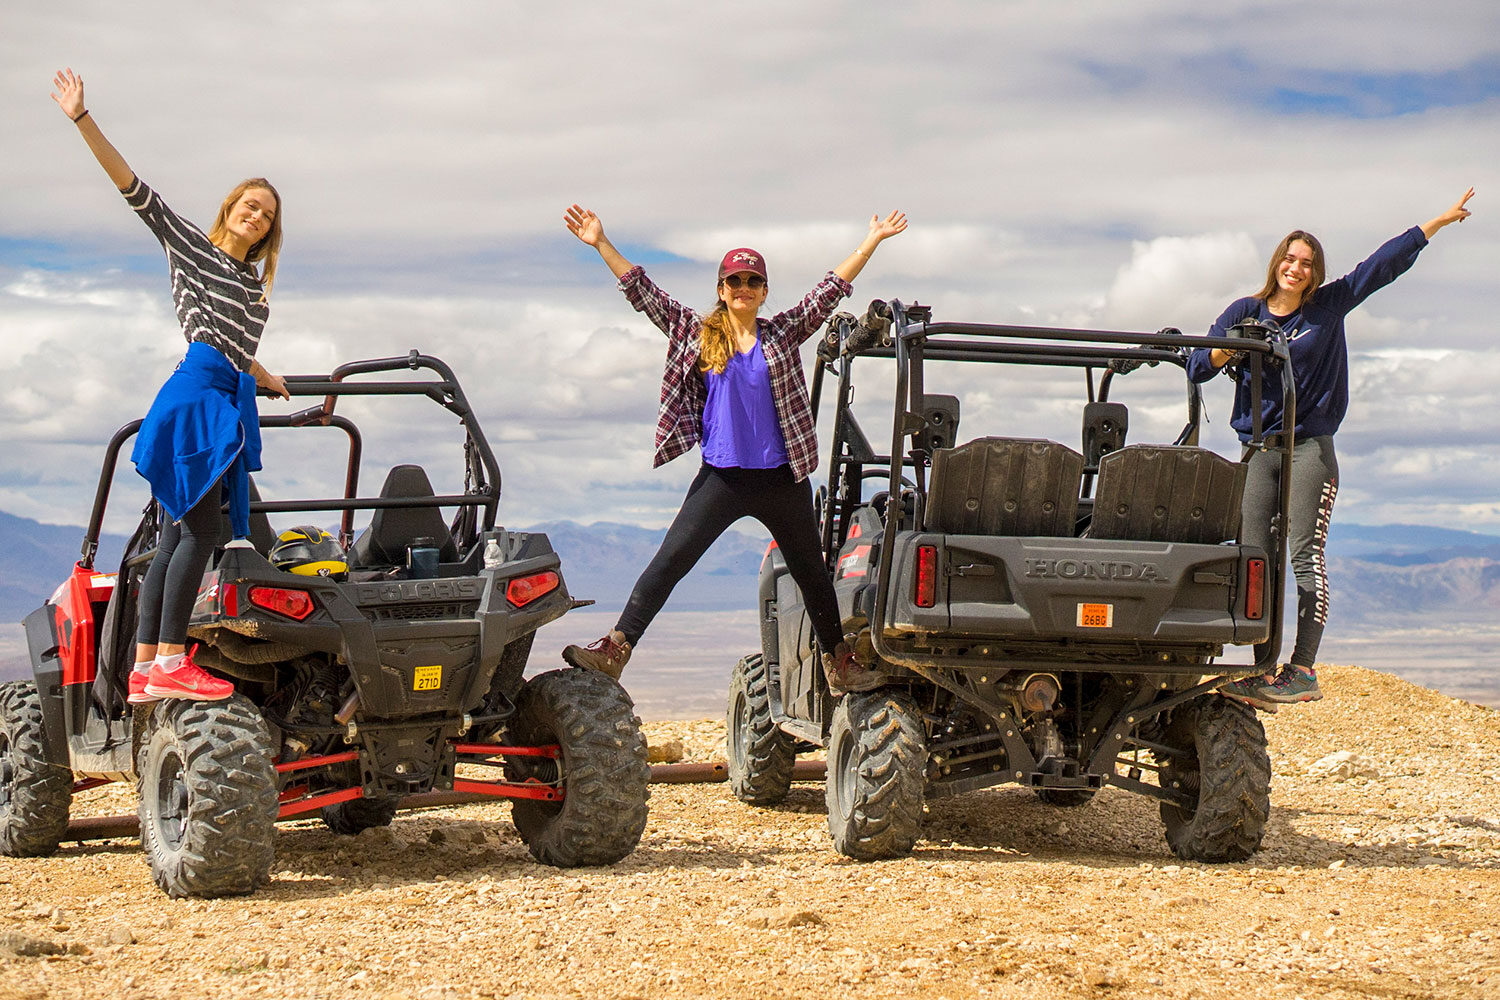 3 women standing on 2 ATVs smiling with arms waving